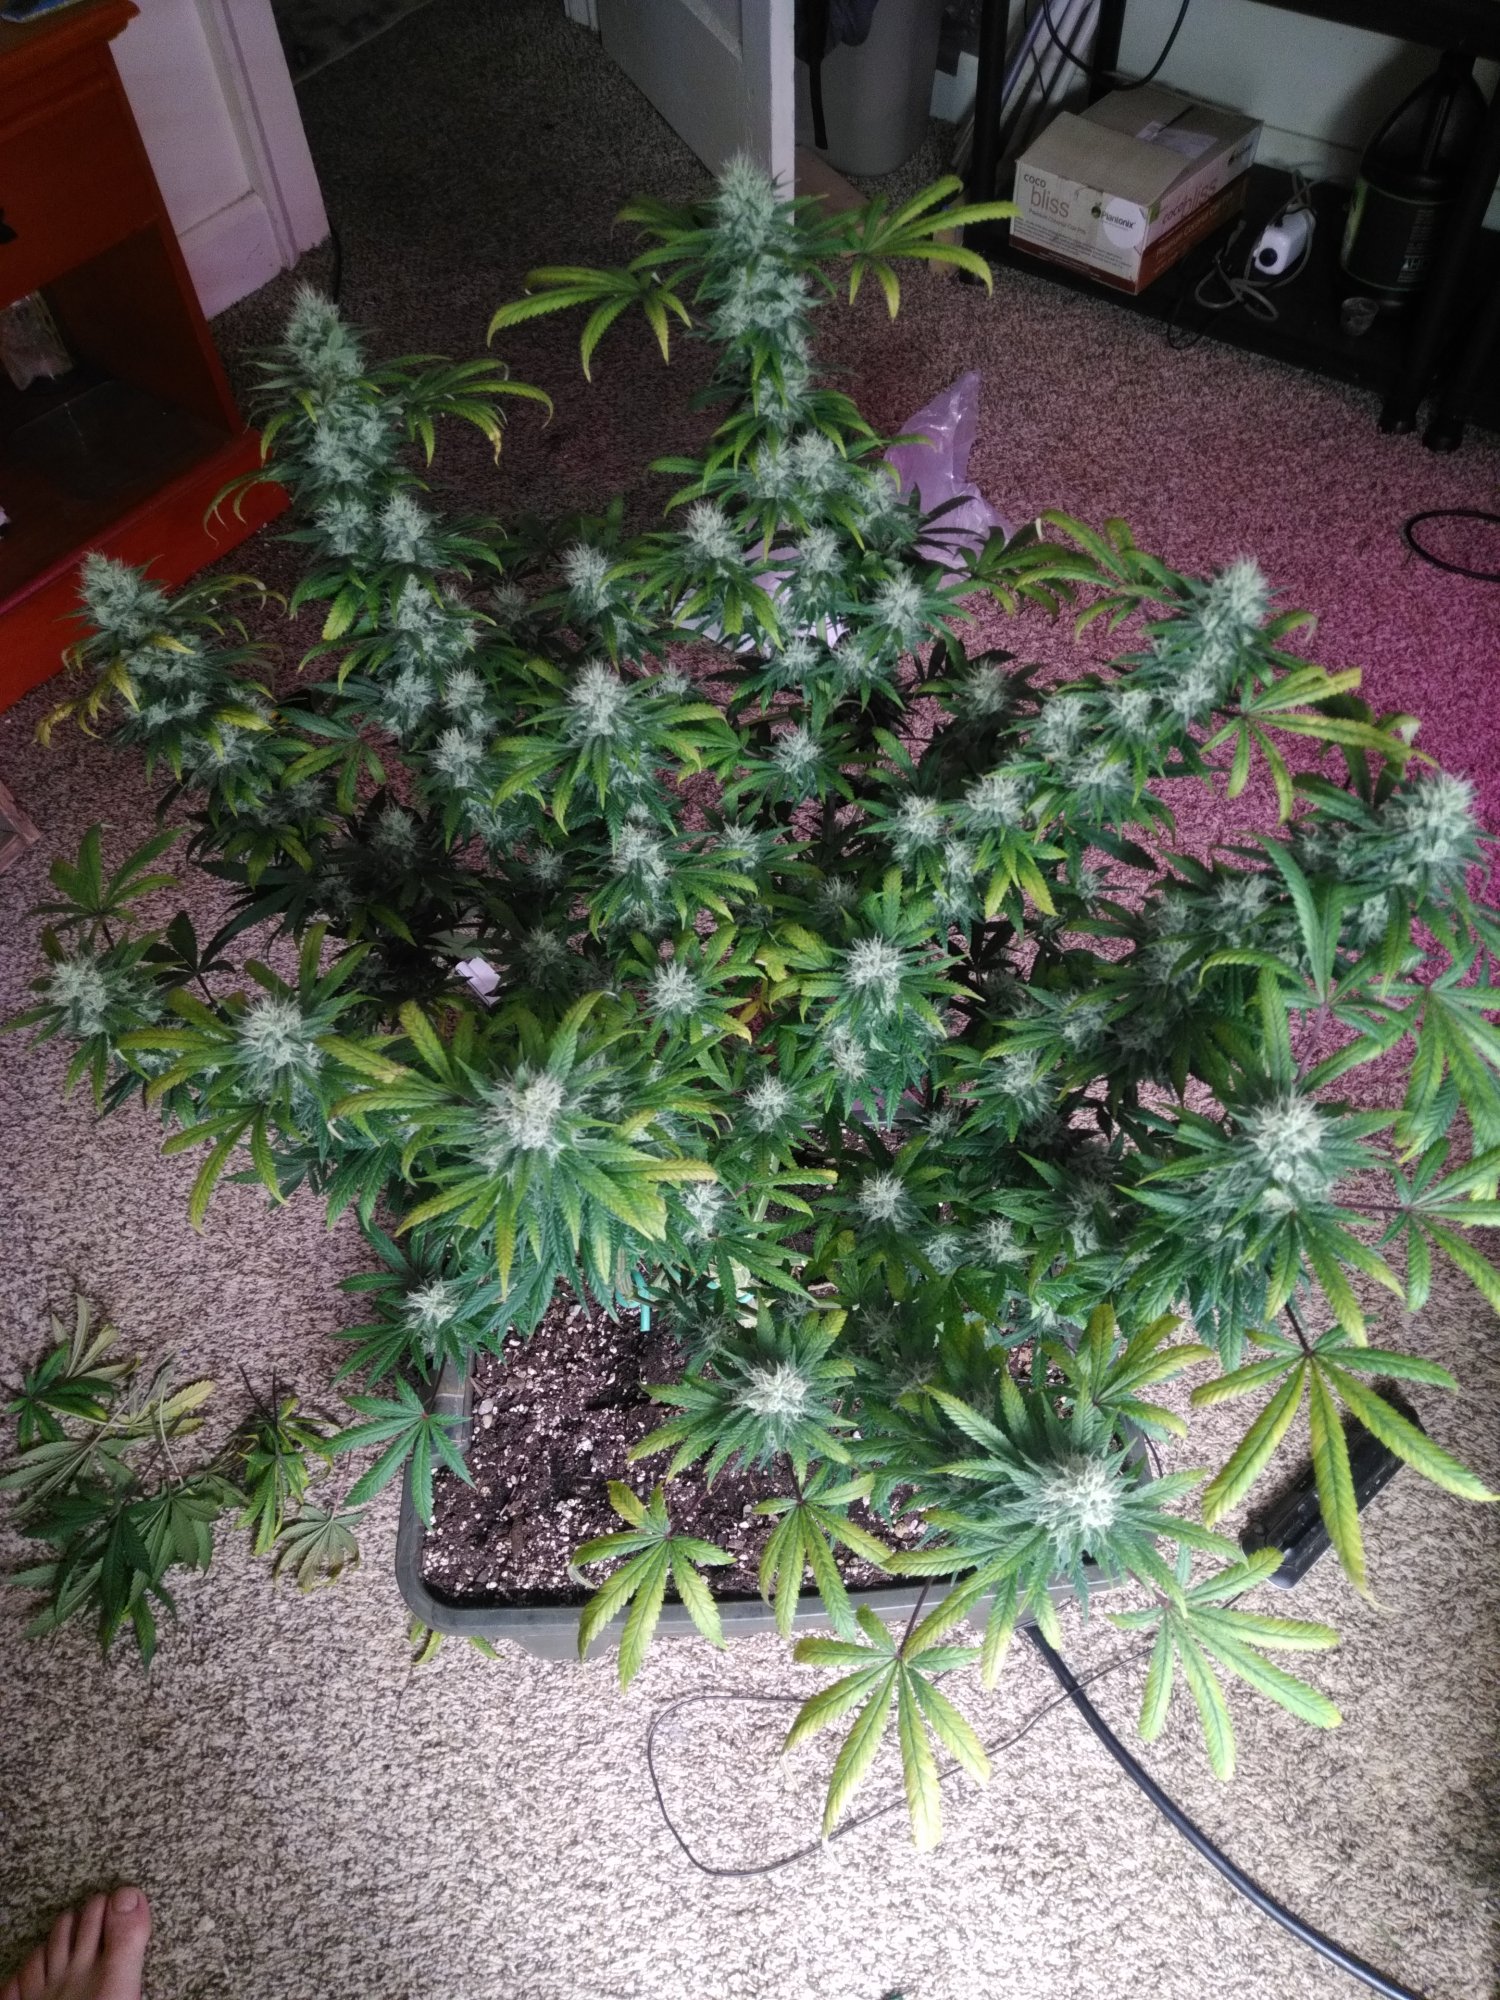 Check me out my biggest buds yet 5